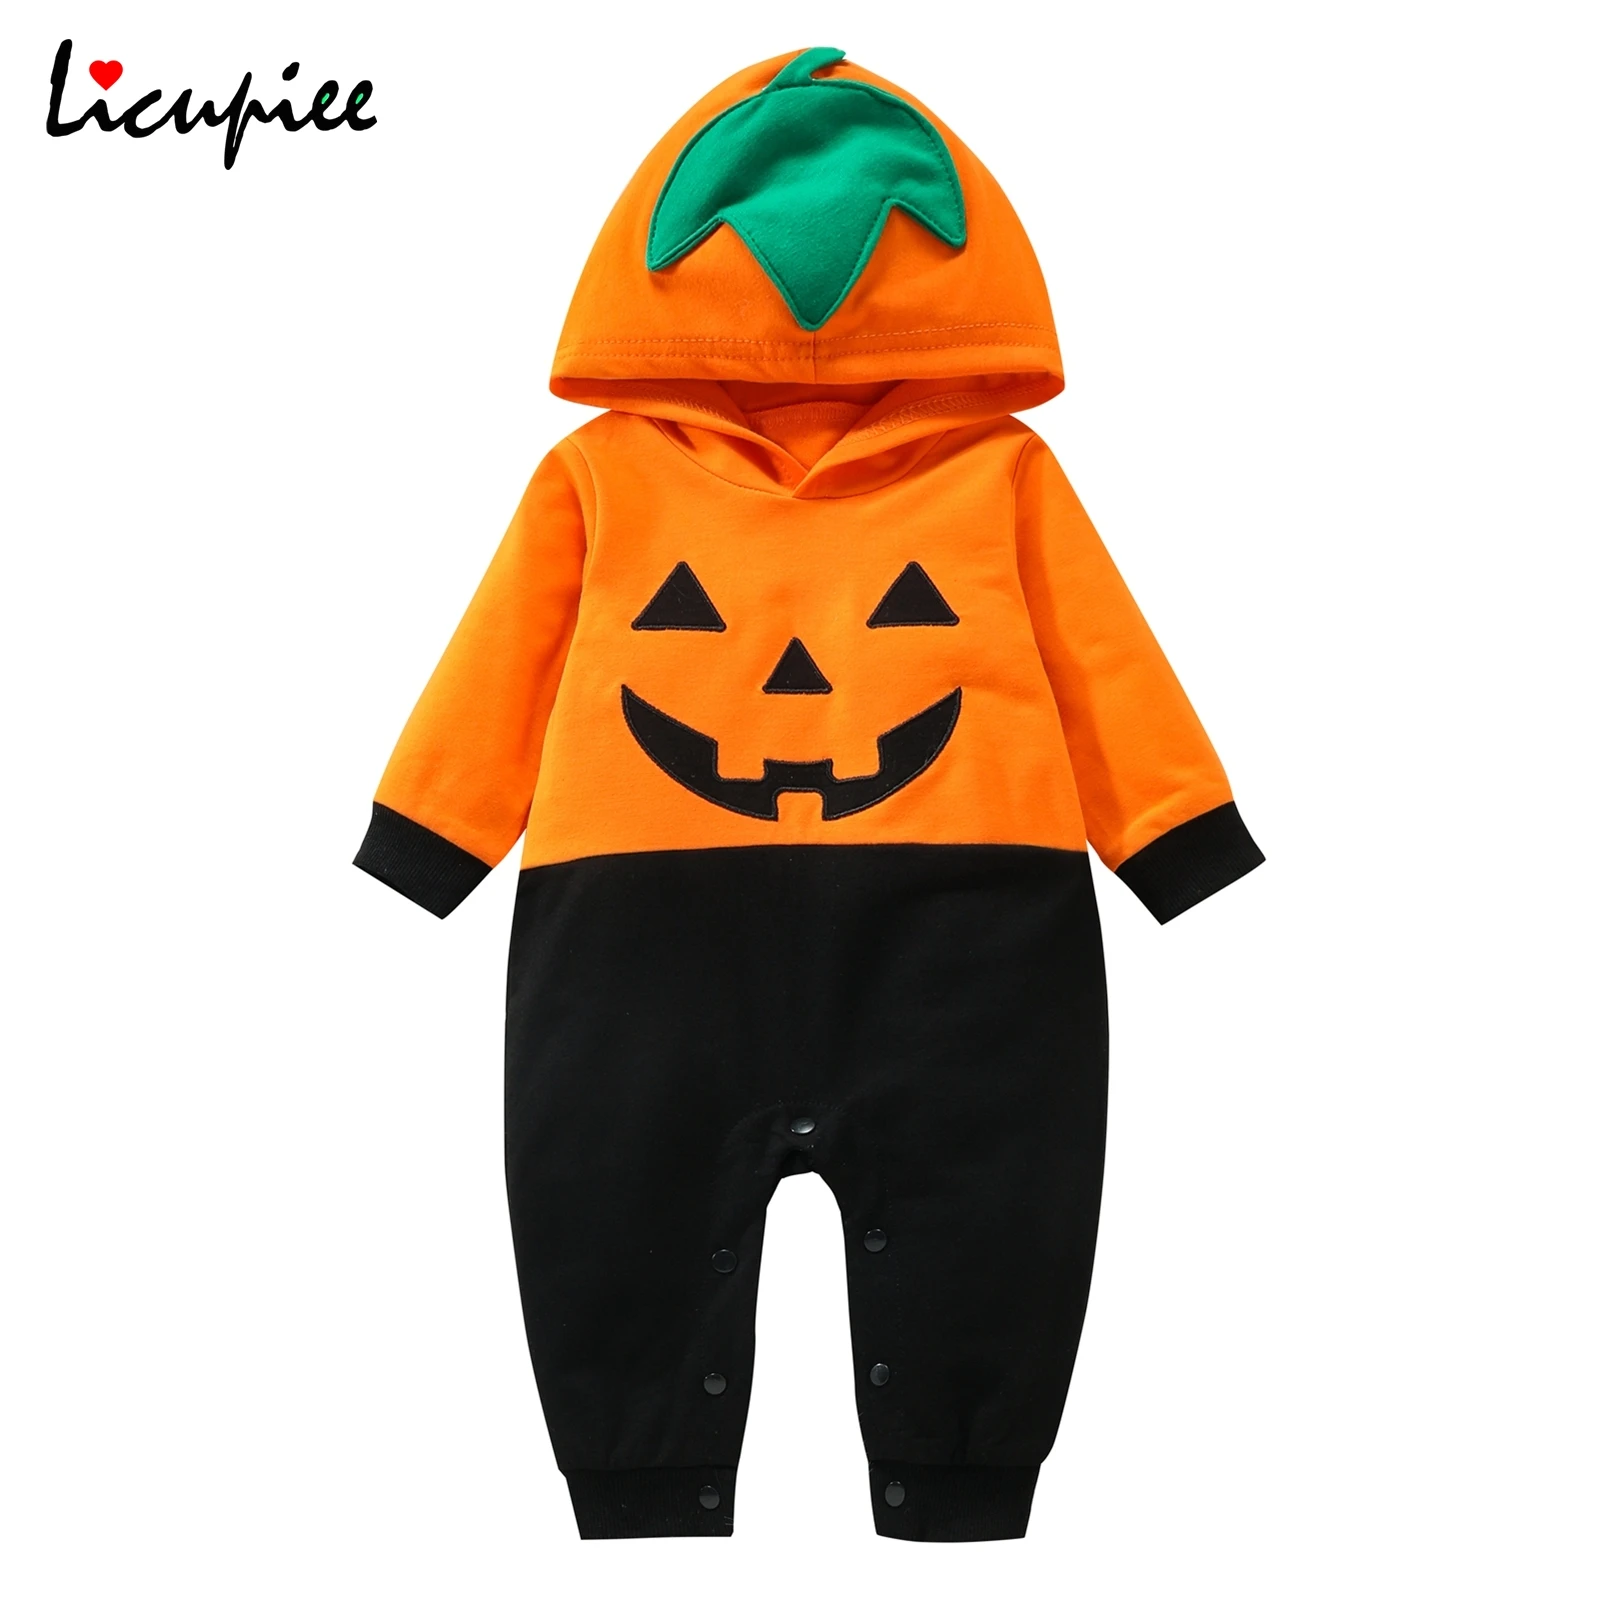 

0-24 Months Toddler Halloween Jumpsuit Applique Smiling Face Hooded Long Sleeves Clothing Romper for Baby Girls, Boys,